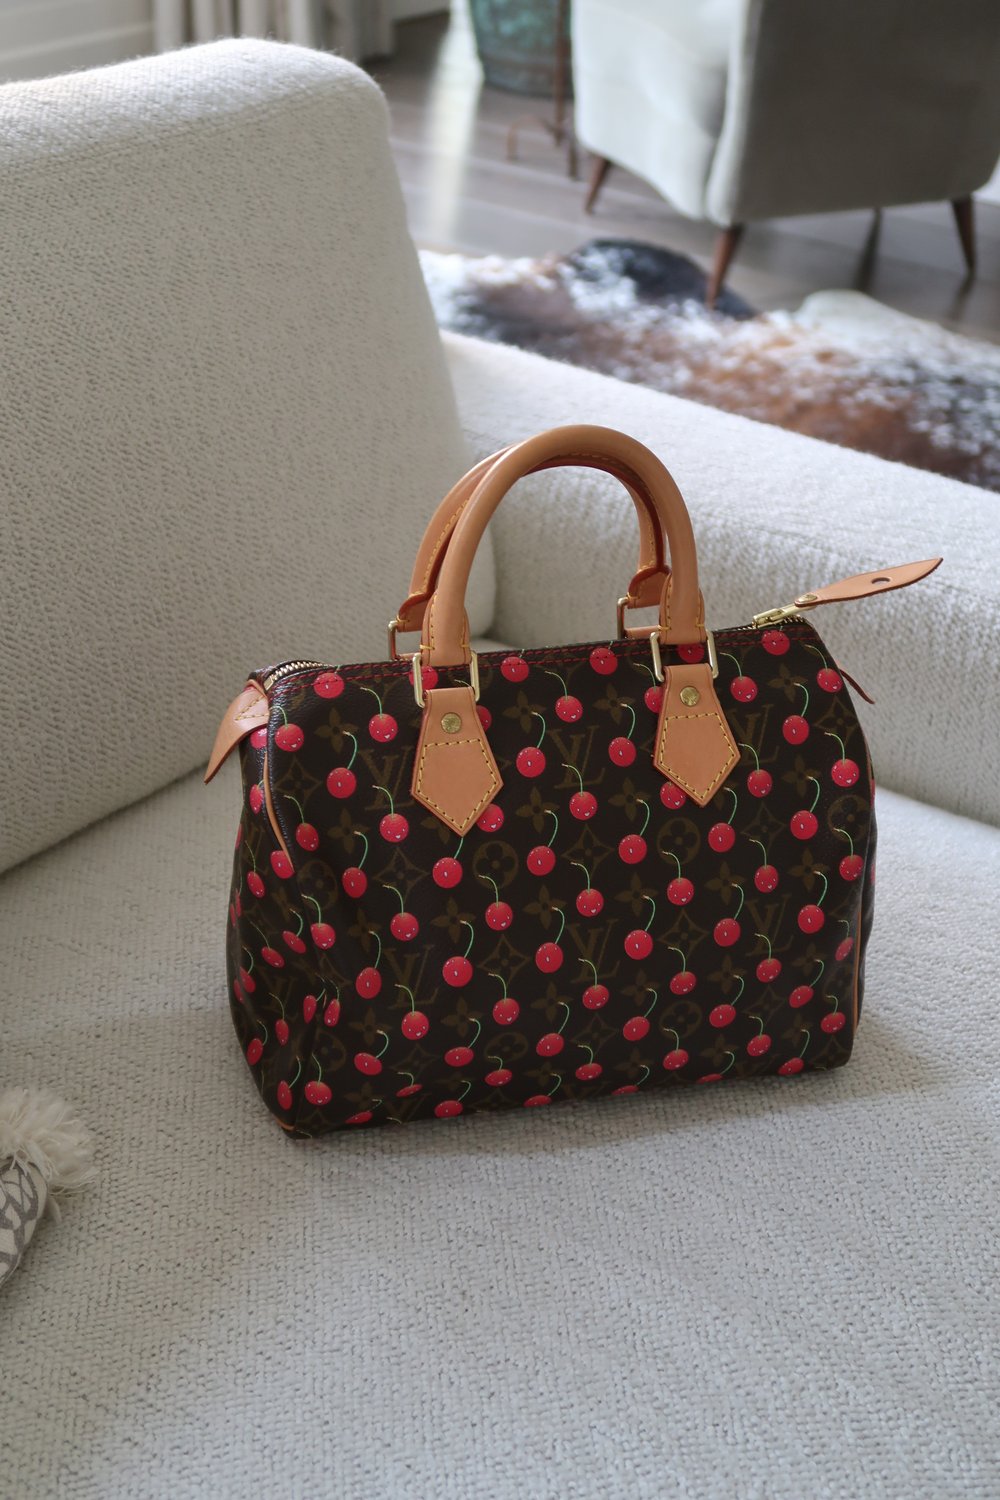 still obsessed with this Louis Vuitton Murakami Cherry Speedy 25 bag,  spotted on Kylie a few years ago! @vintagebonbon has one for sale! 😍🍒✨